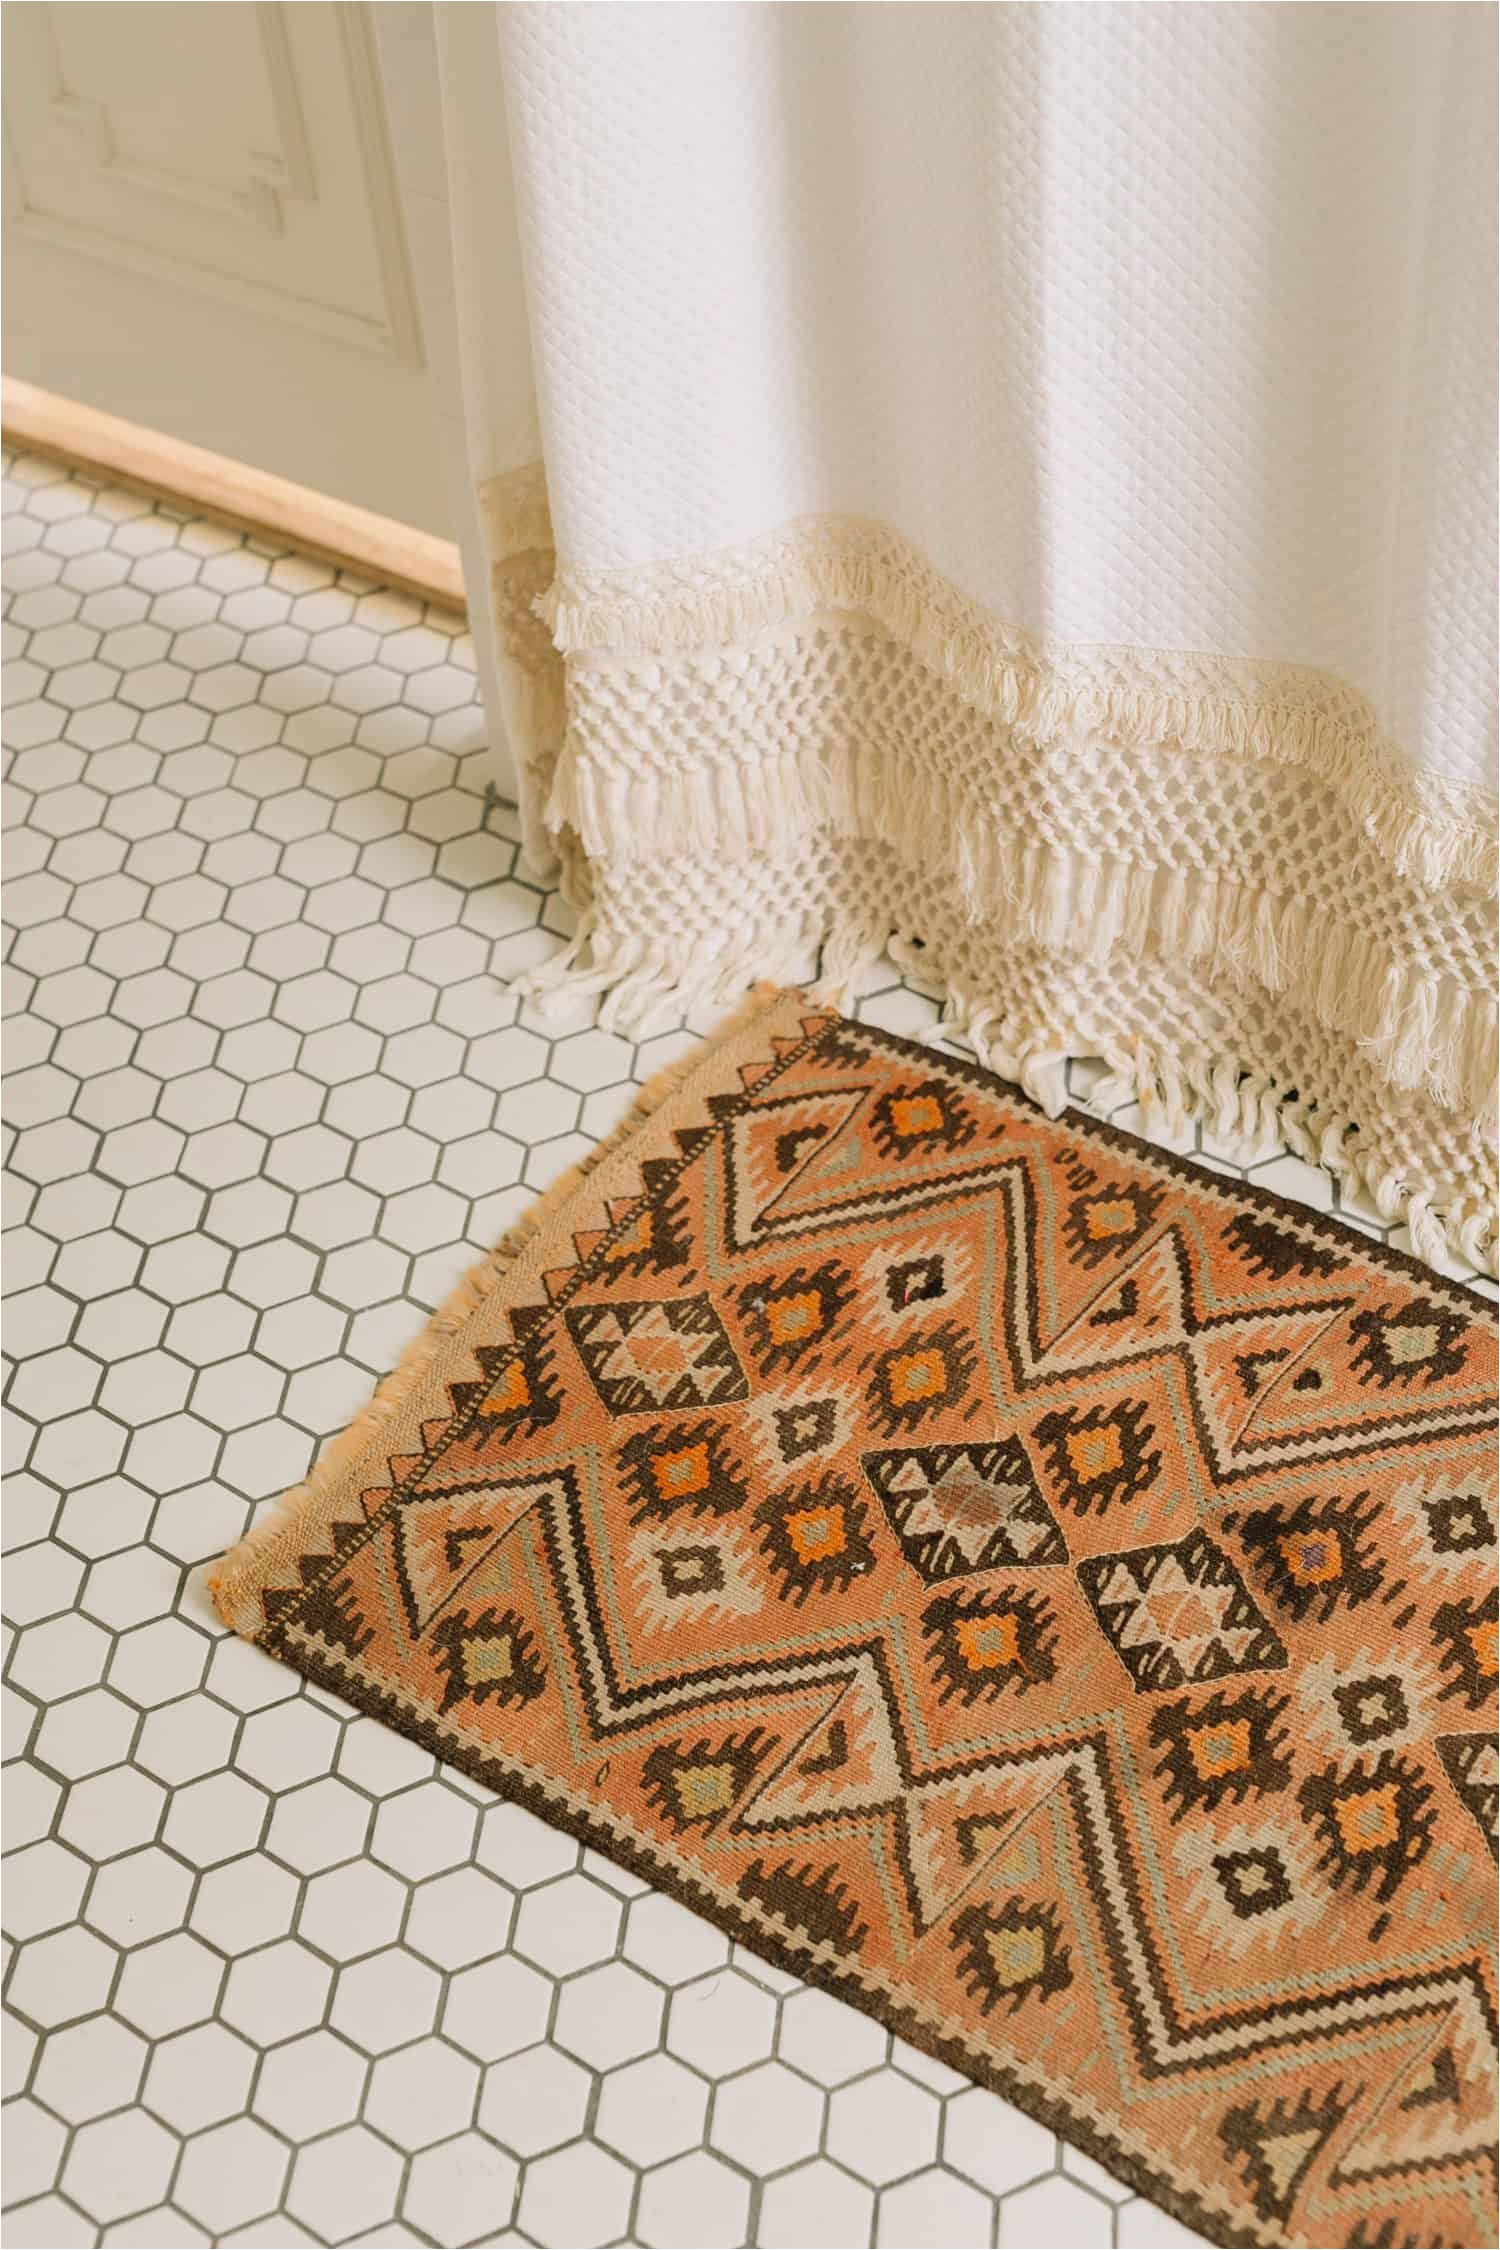 Round Bath Rugs Ikea How to Shop for Vintage Rugs A Beautiful Mess